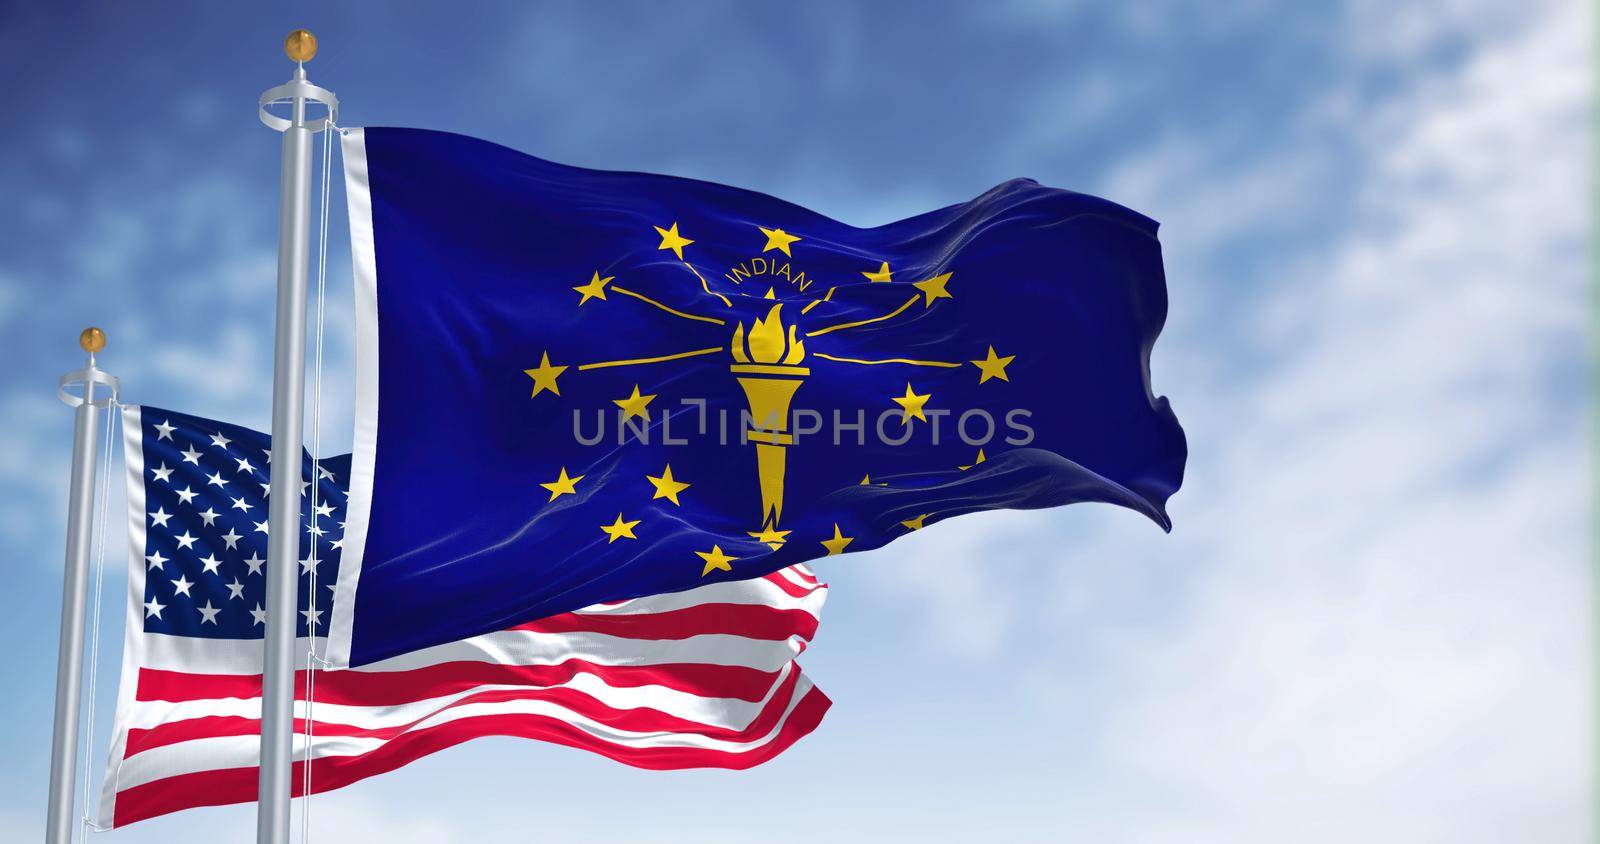 The Indiana state flag waving along with the national flag of the United States of America. by rarrarorro